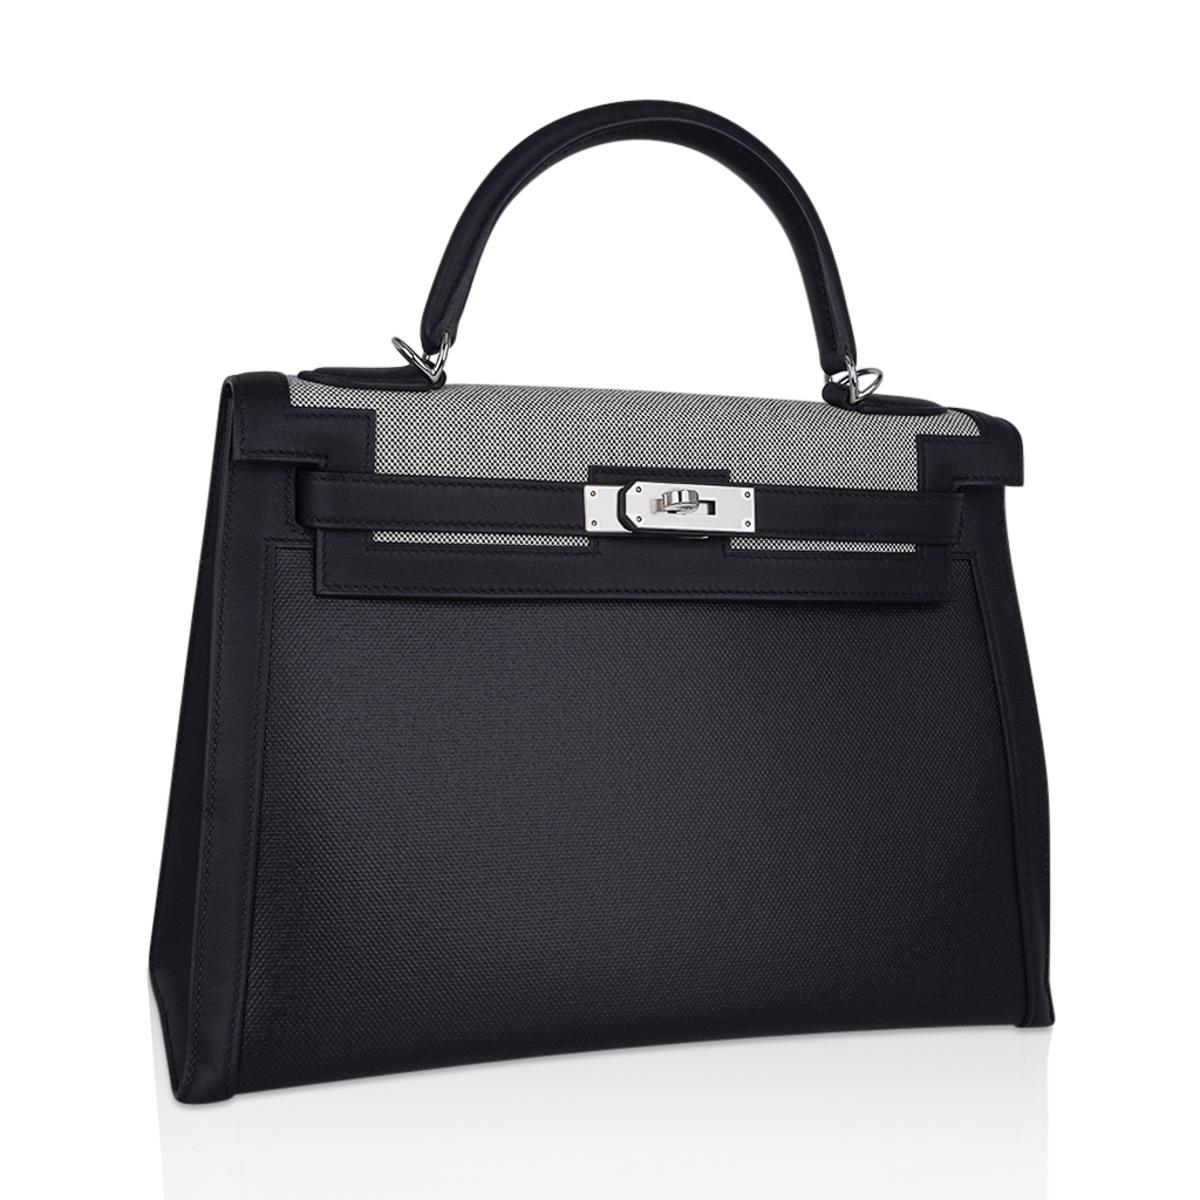 Mightychic offers a  Limited Edition Hermes Kelly II Sellier 32 bag.
This striking bag is featured in Toile H Berline, a coated canvas,  and Toile H Plume.
Finished in Black Swift leather..
This  beautiful Hermes Kelly bag is accentuated with crisp